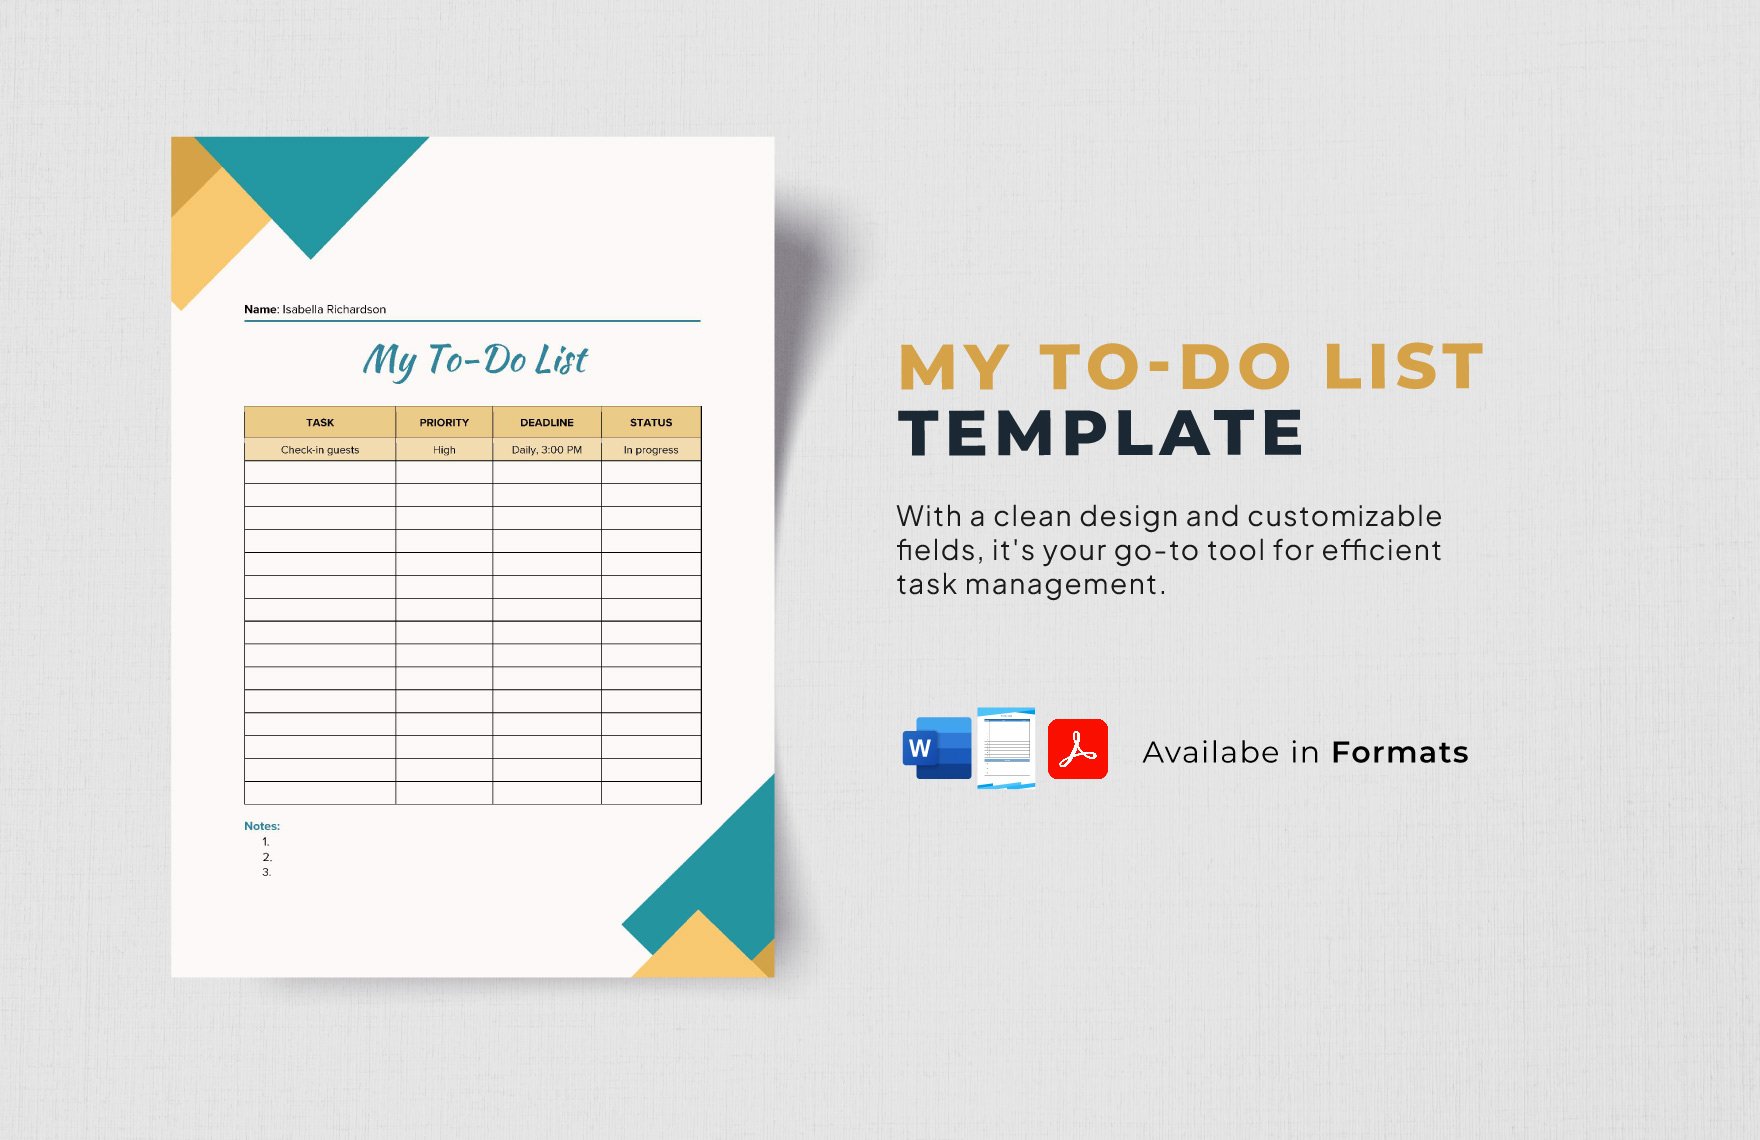 My To-Do List Template